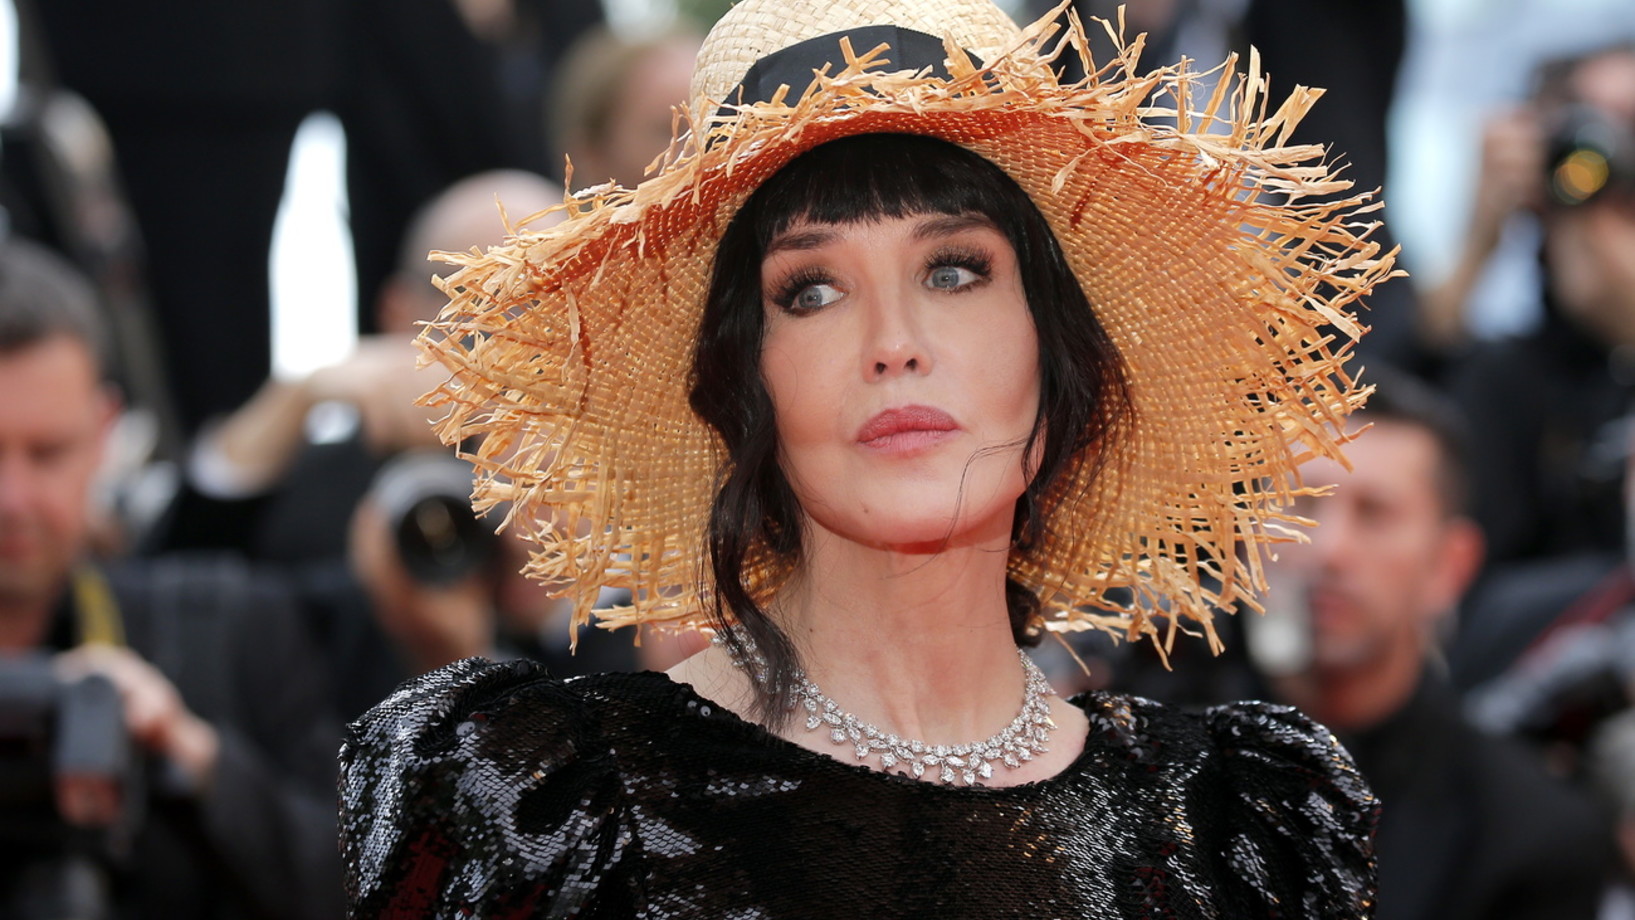 (Foto: Keystone/EPQ/Julien Warnand)
epa07587318 French actress Isabelle Adjani arrives for the screening of 'La Belle Epoque' during the 72nd annual Cannes Film Festival, in Cannes, France, 20 May 2019. The movie is presented out of competition at the festival which runs from 14 to 25 May. EPA/JULIEN WARNAND 